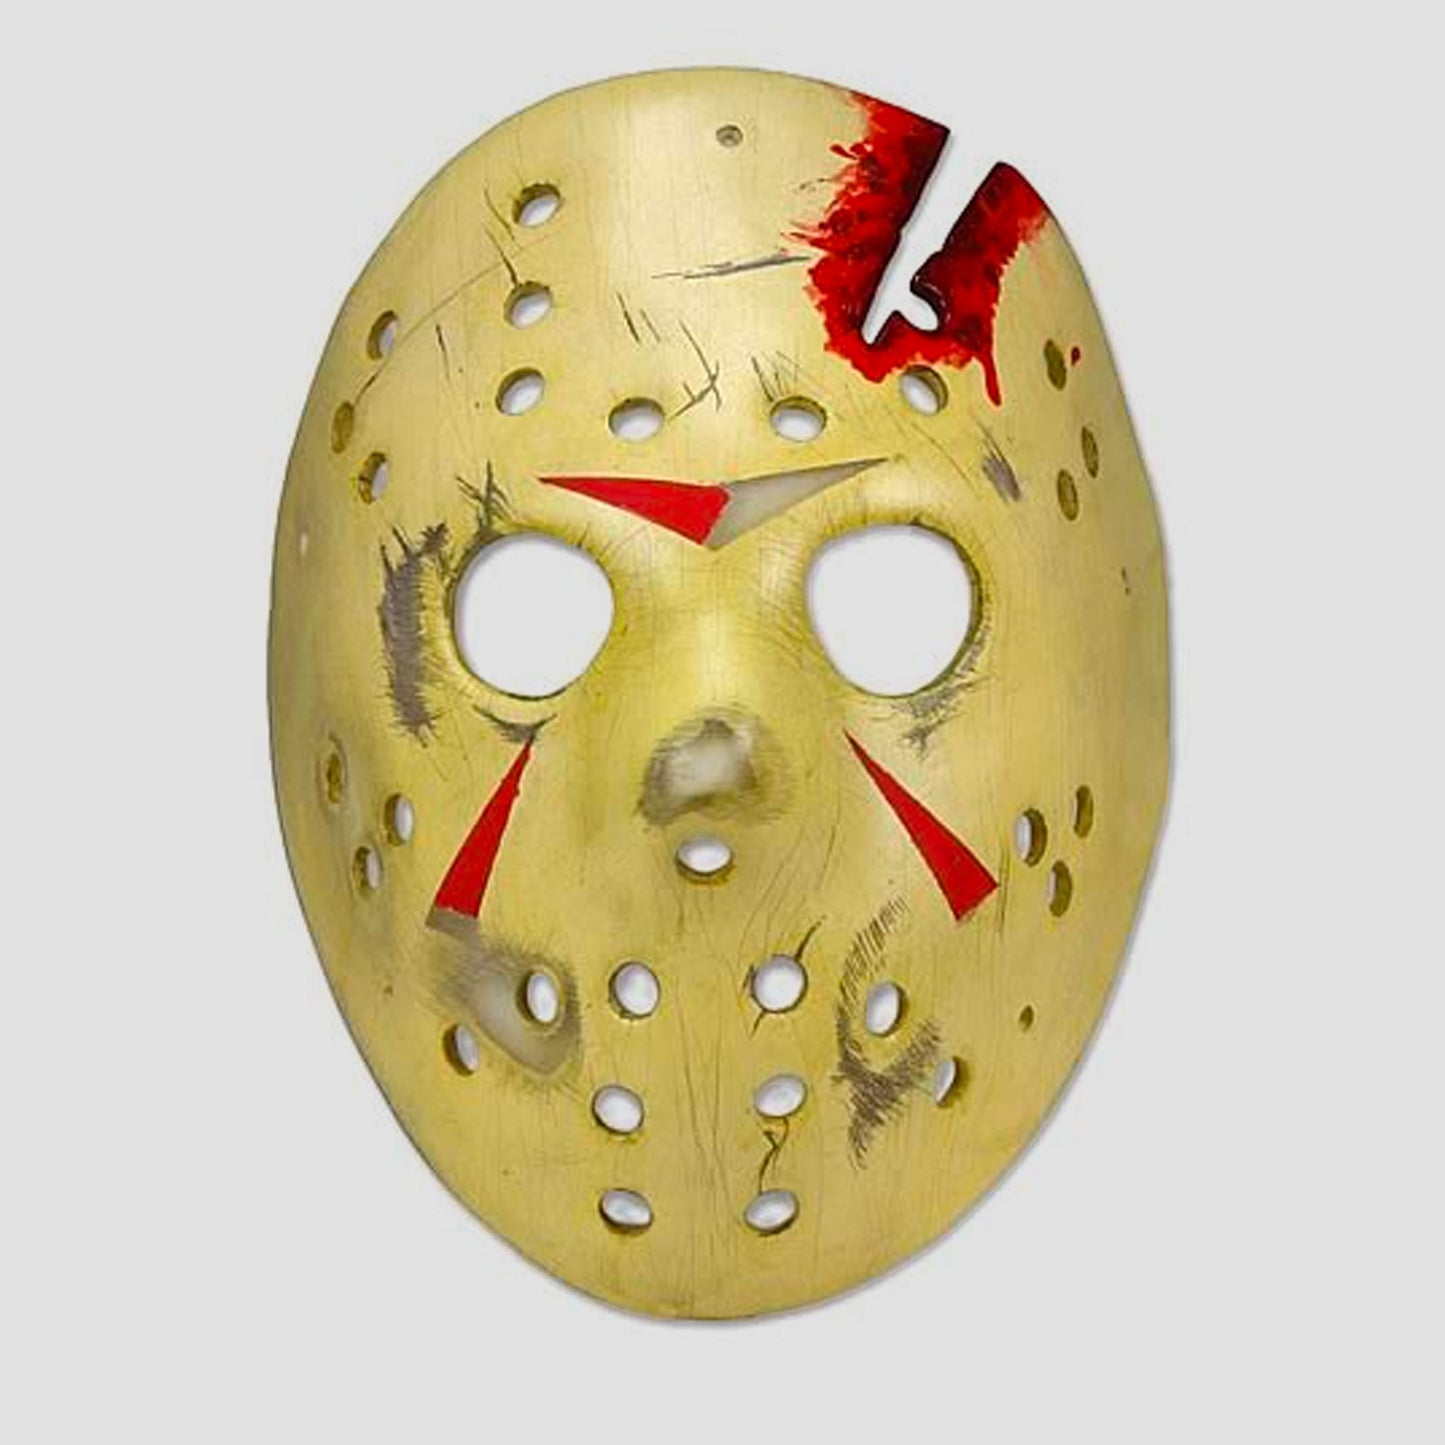 Jason Voorhees Mask (Friday the 13th: The Final Chapter) NECA Prop Replica